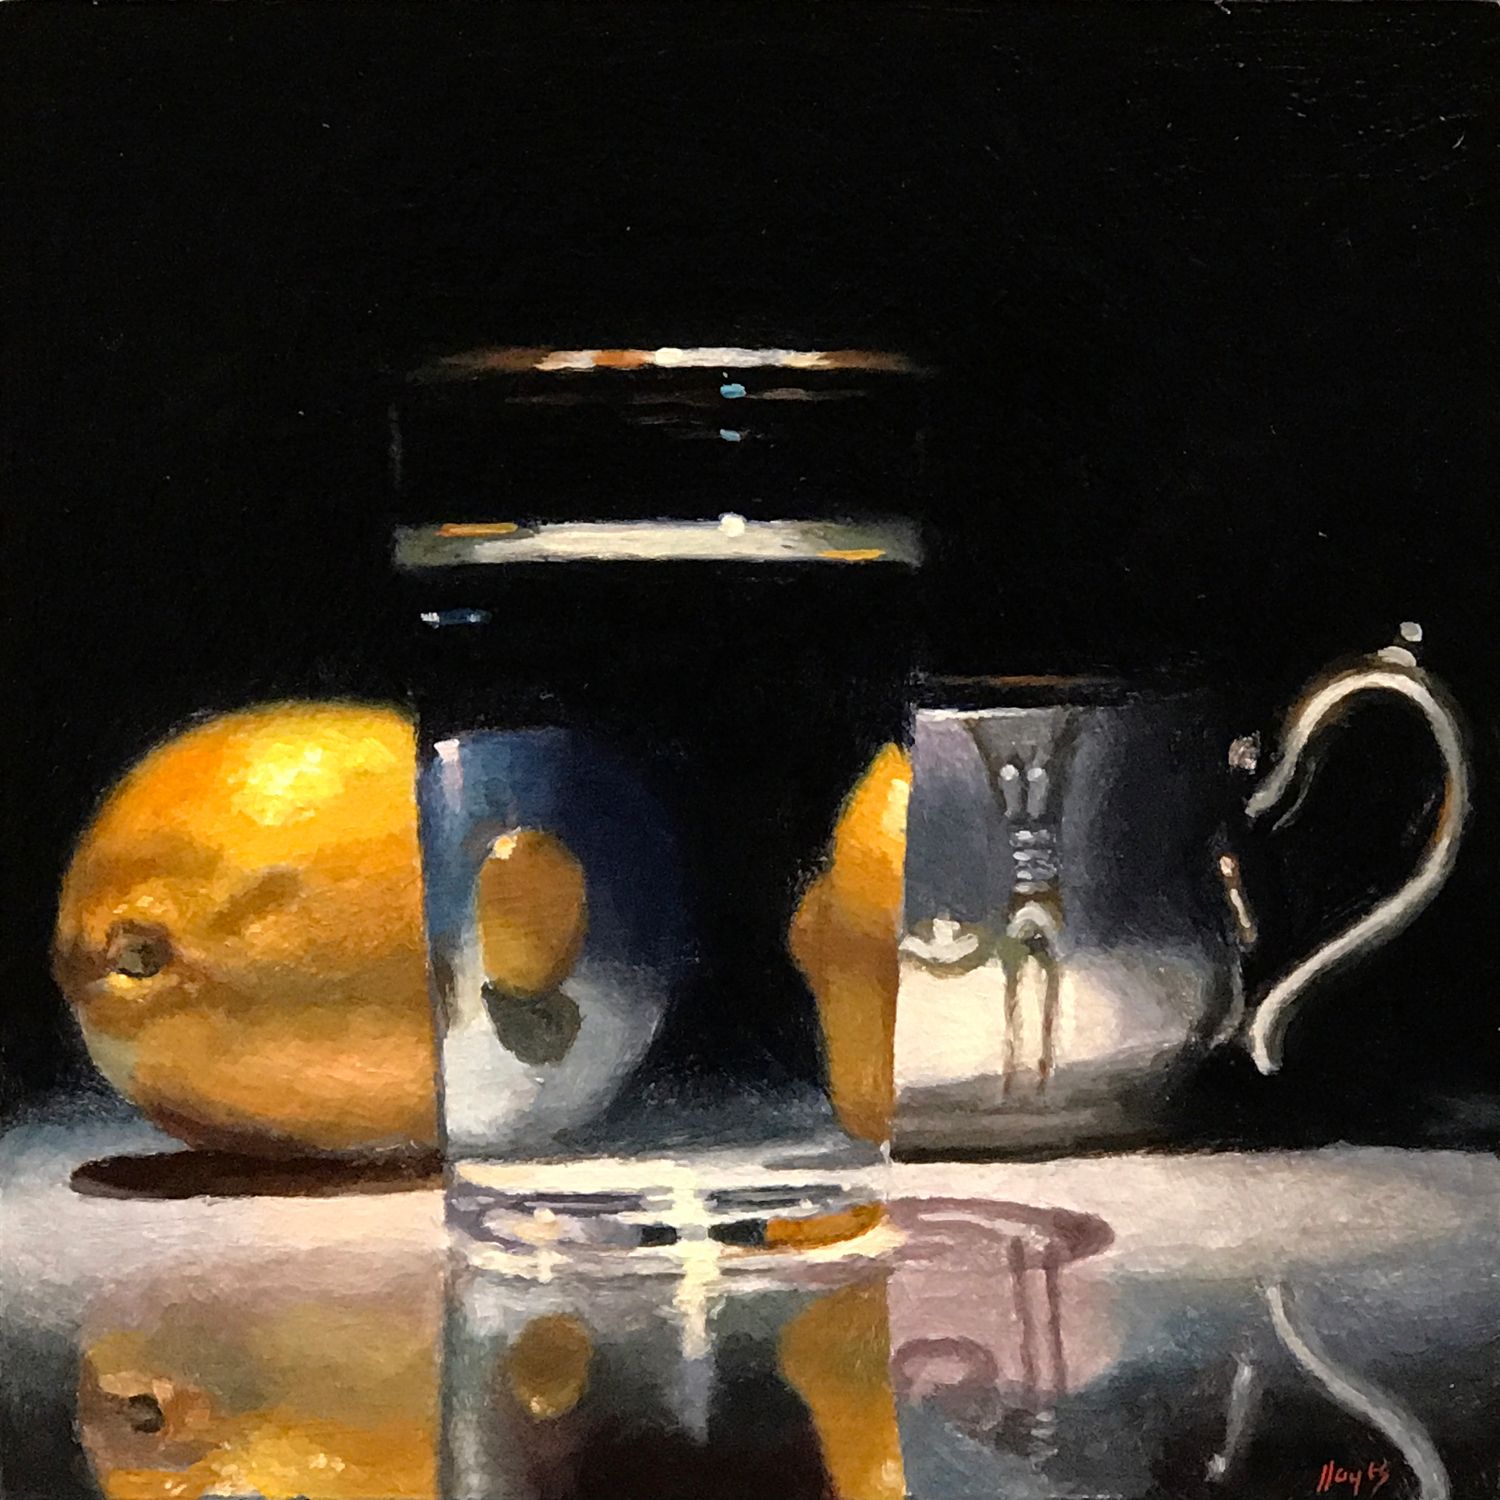 "Lemon, Silver, Glass" Oil on panel, 5x5 inches, 2021 (Prints are available)